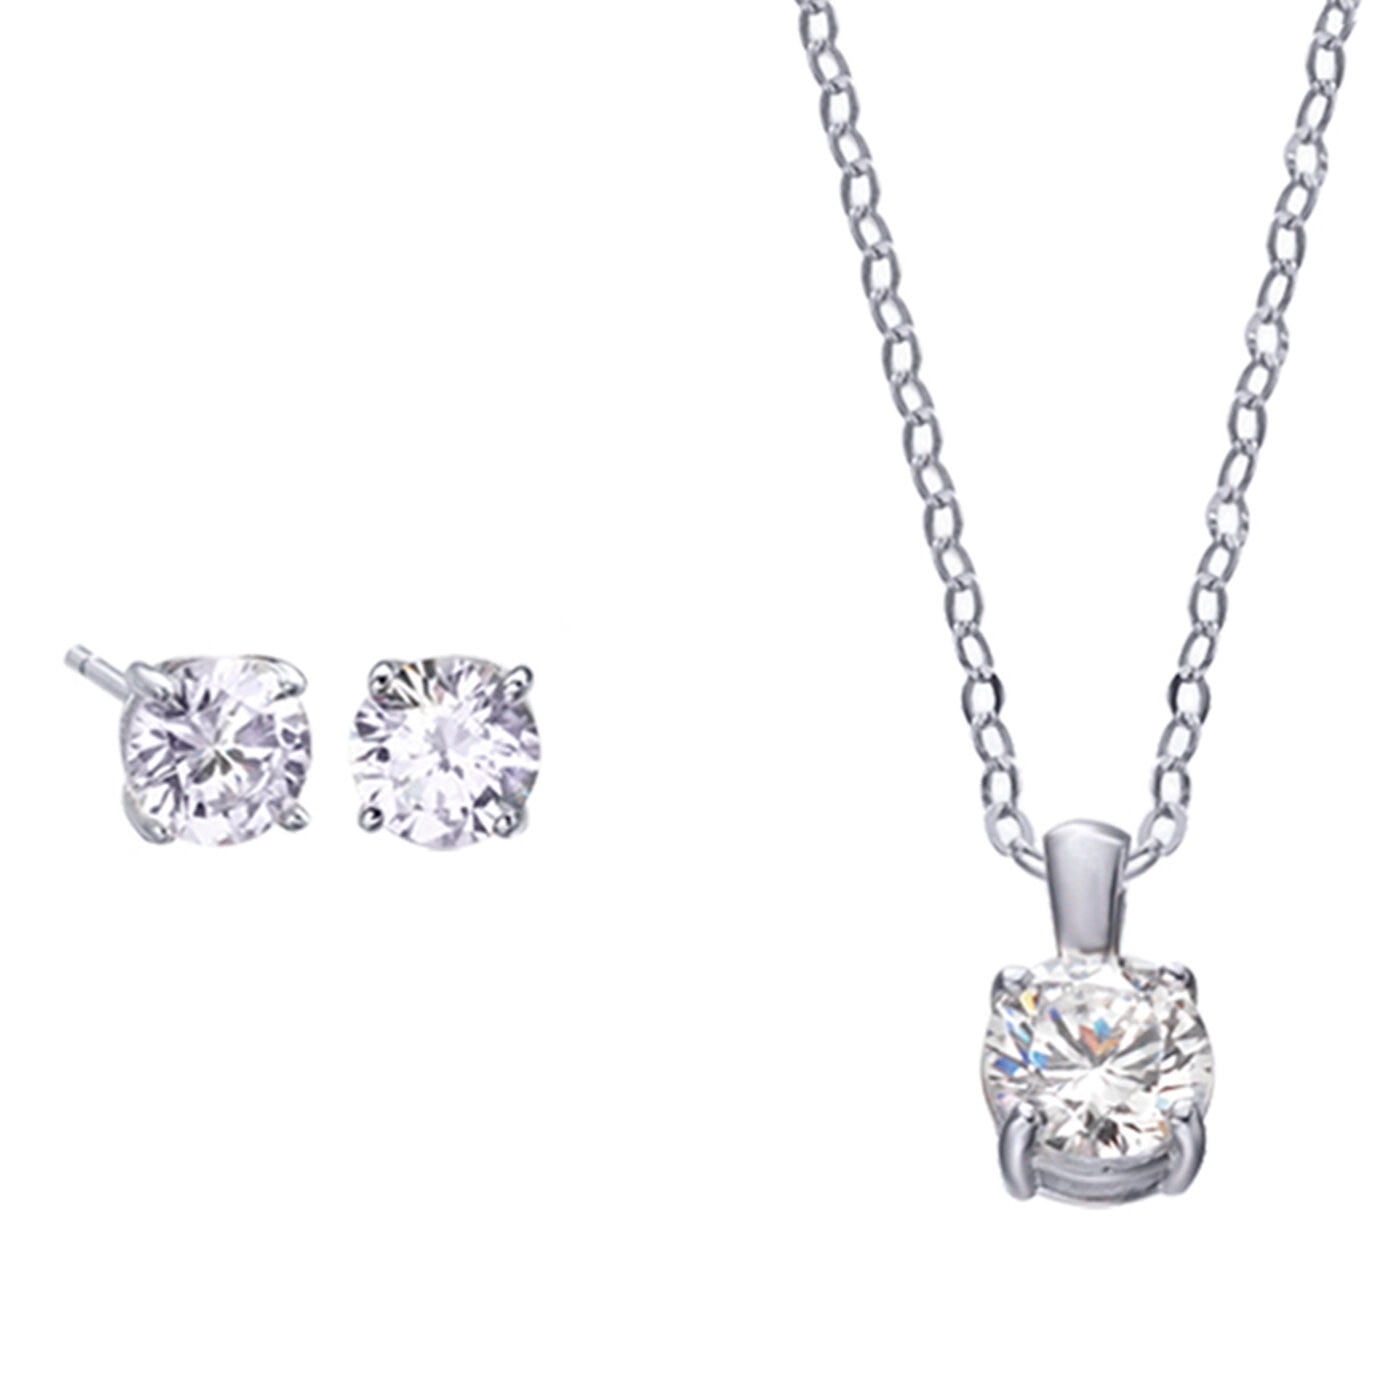 Zircons necklace and earrings set